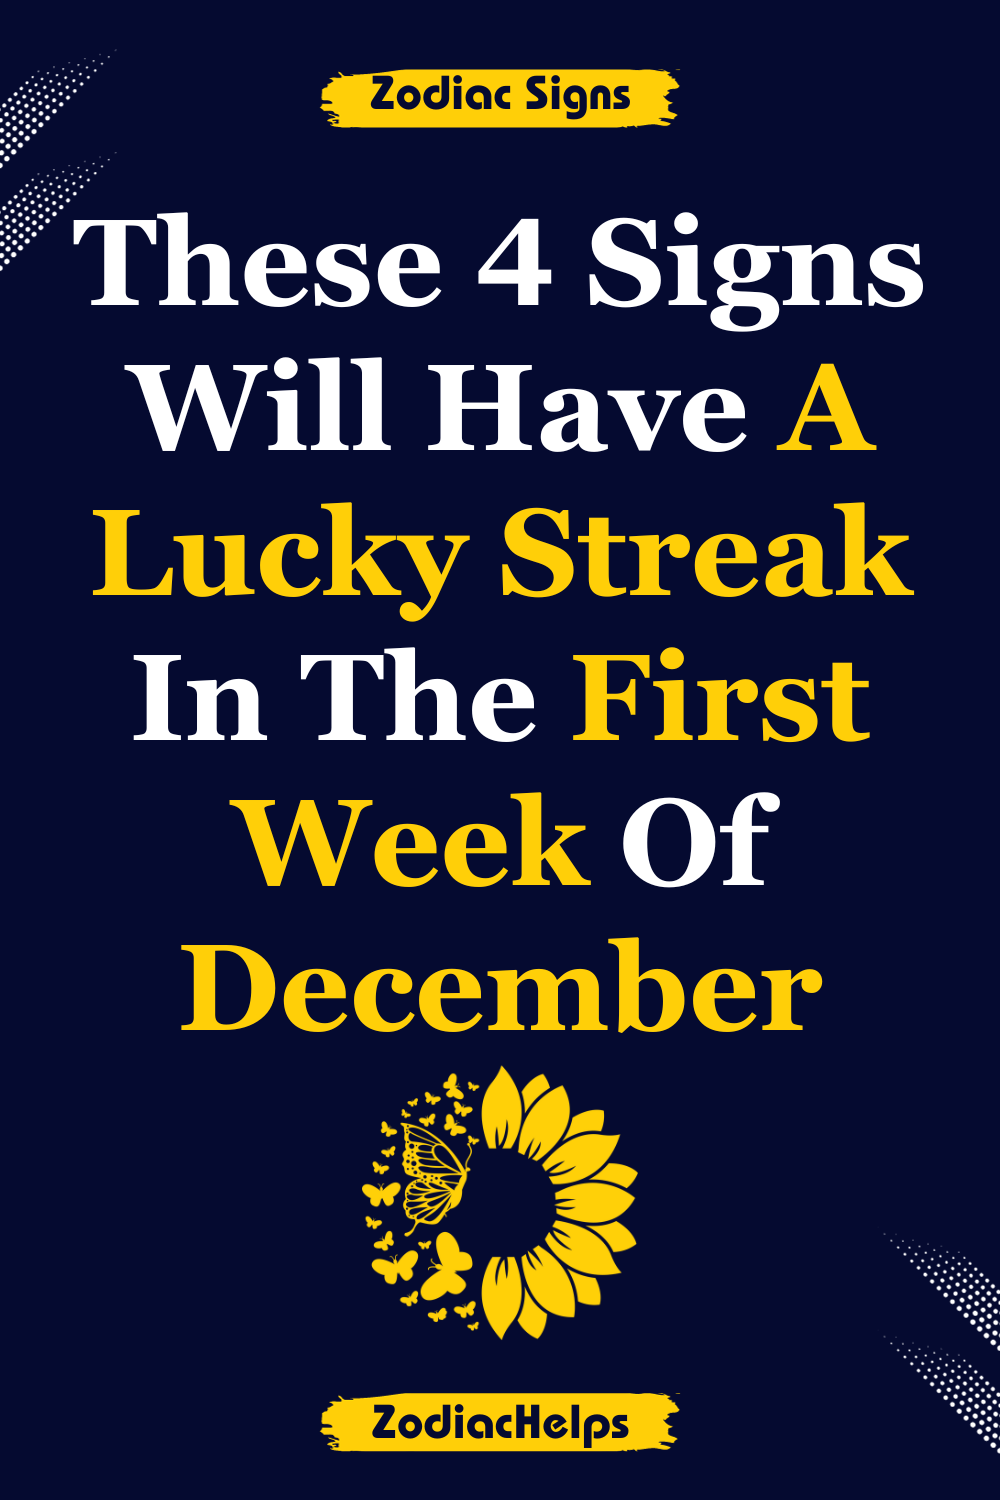 These 4 Signs Will Have A Lucky Streak In The First Week Of December